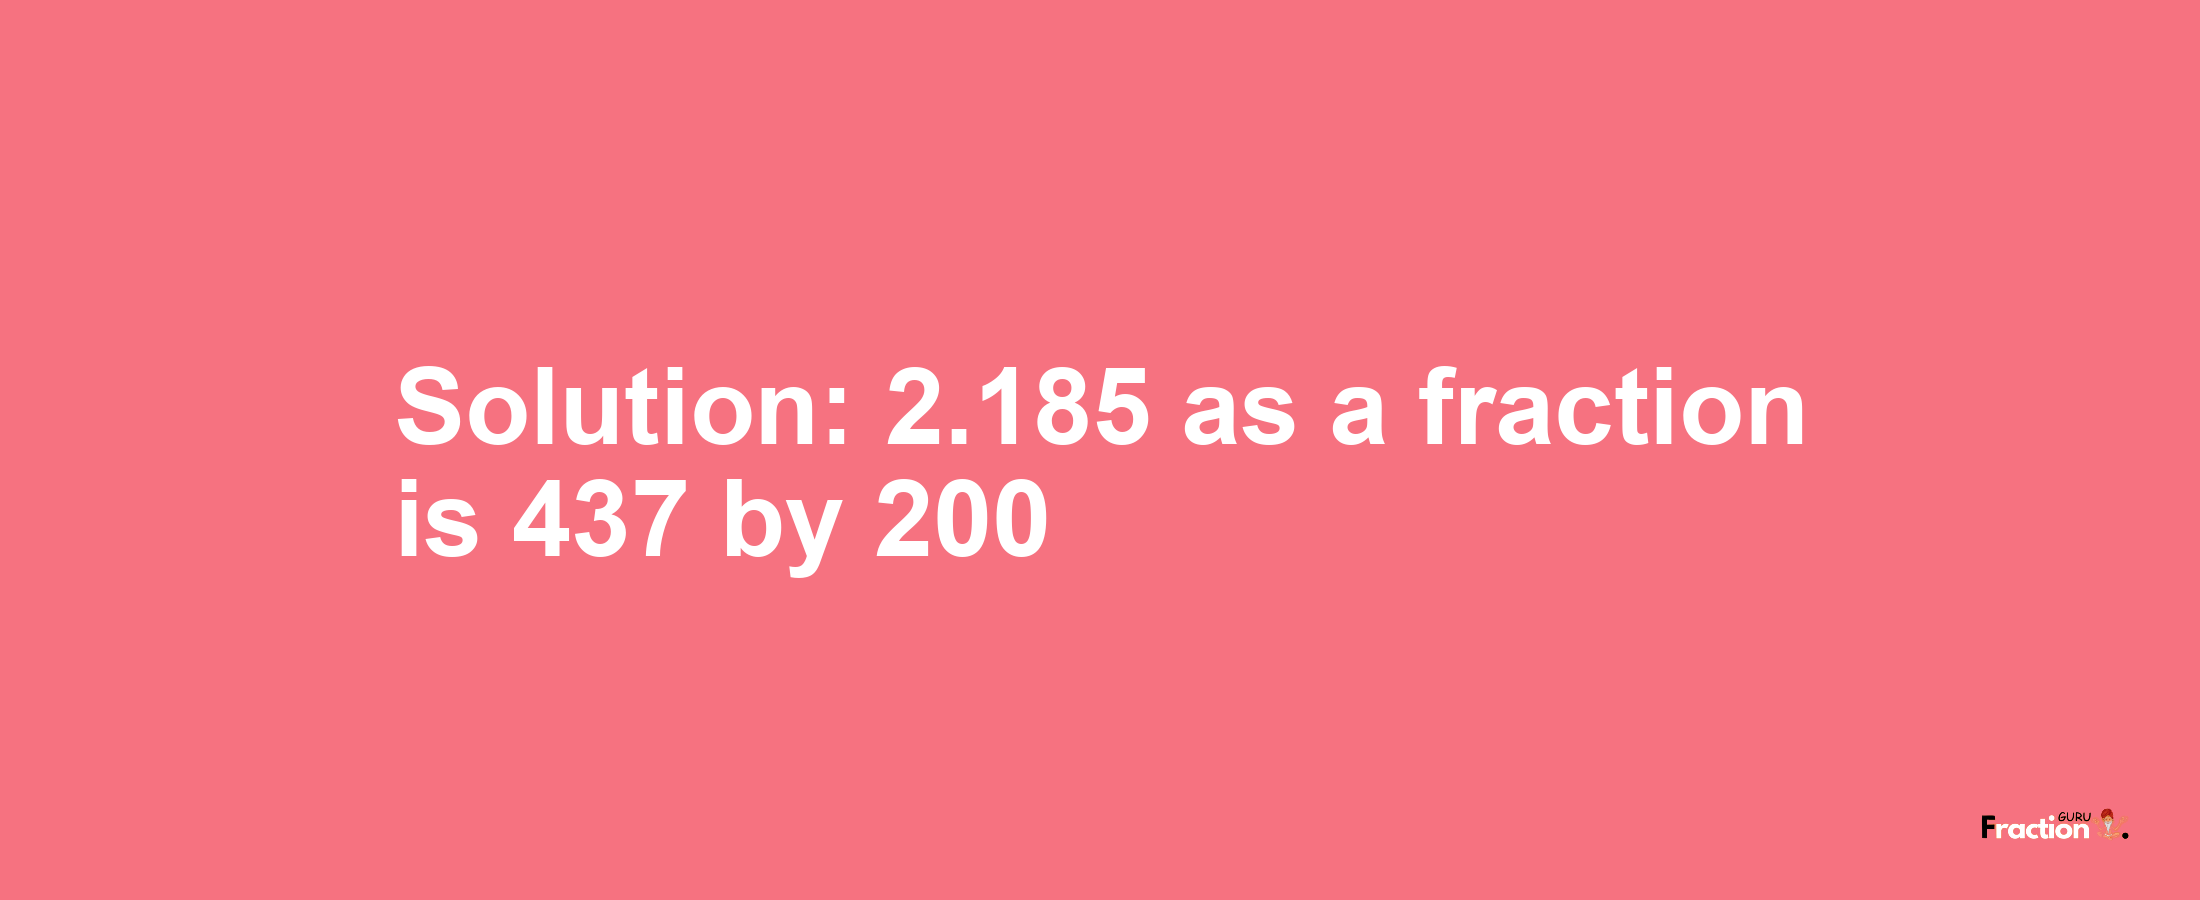 Solution:2.185 as a fraction is 437/200